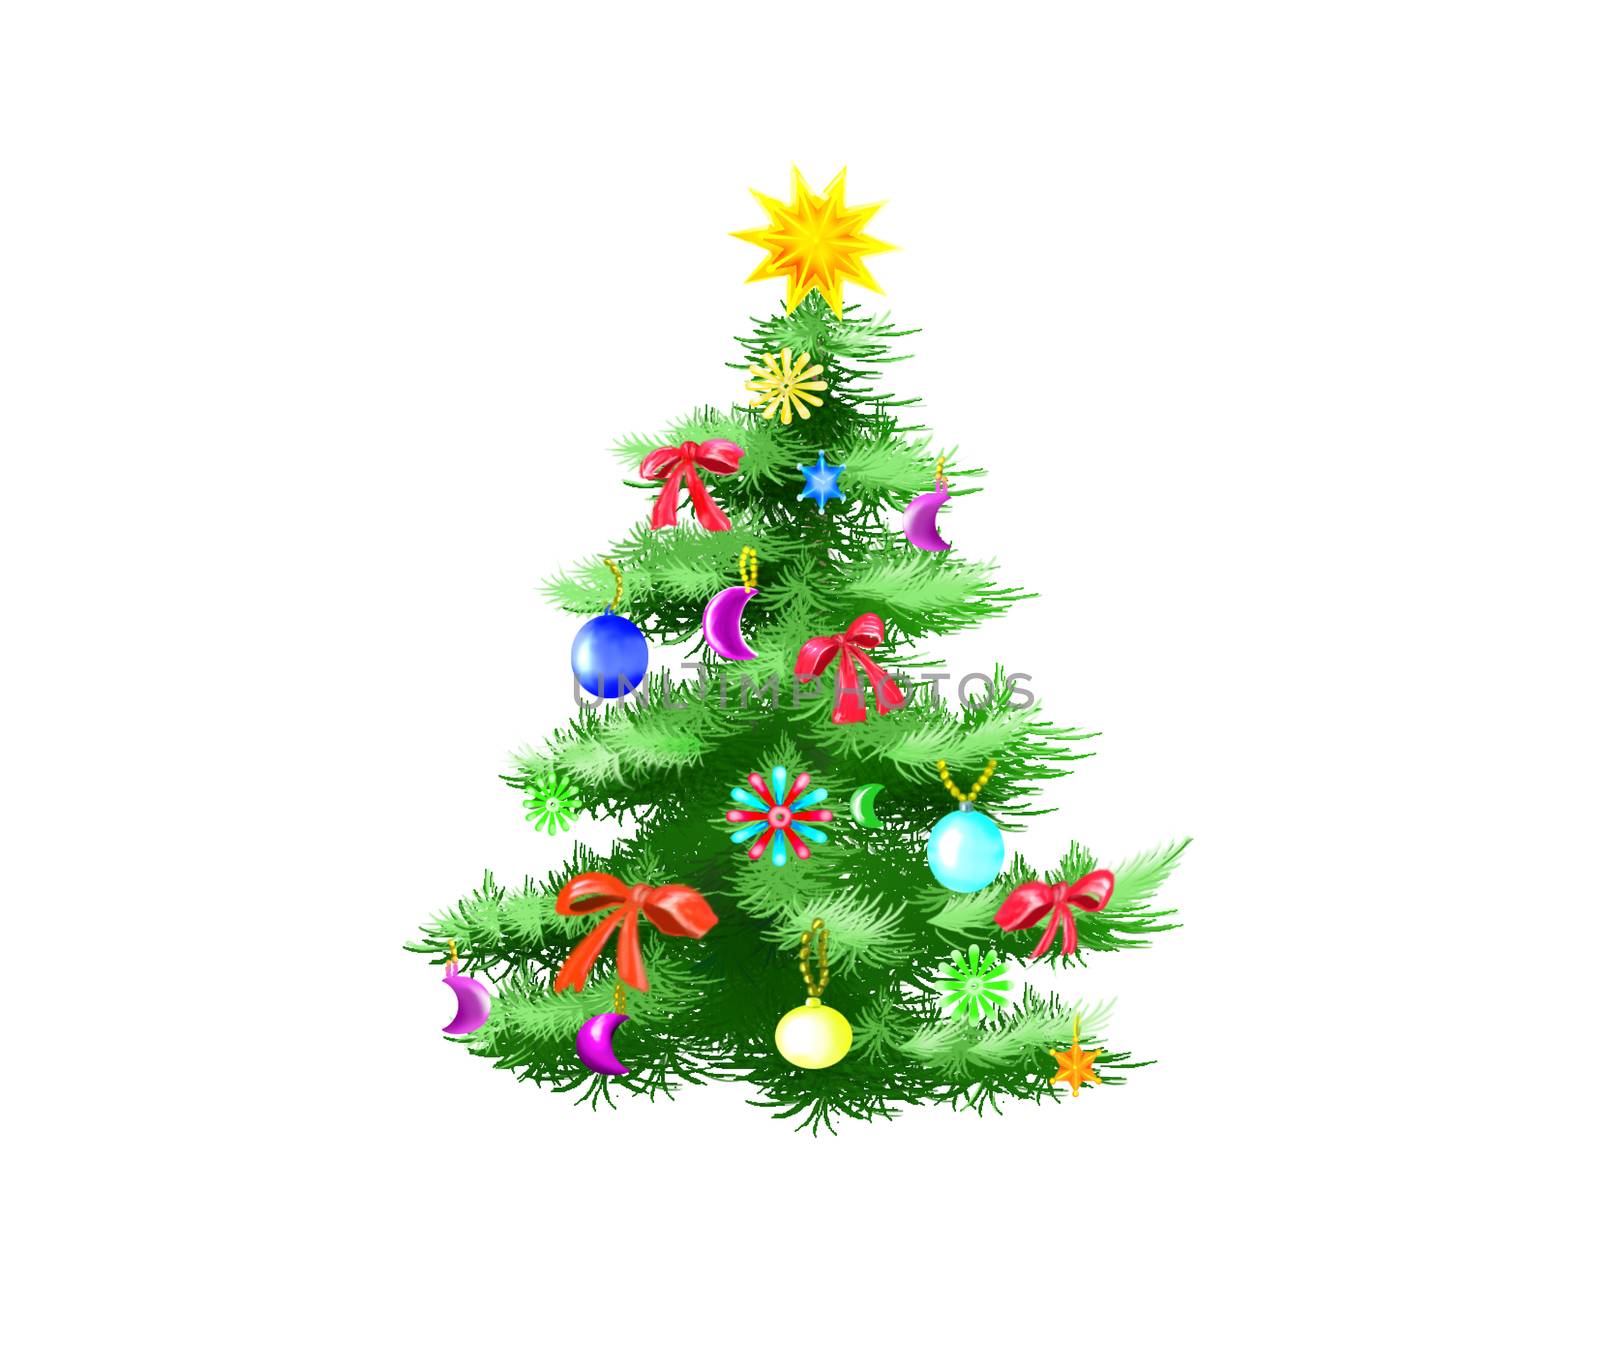 Festively Decorated Christmas Tree Isolated on White Background.  Illustration in a classic cartoon style.